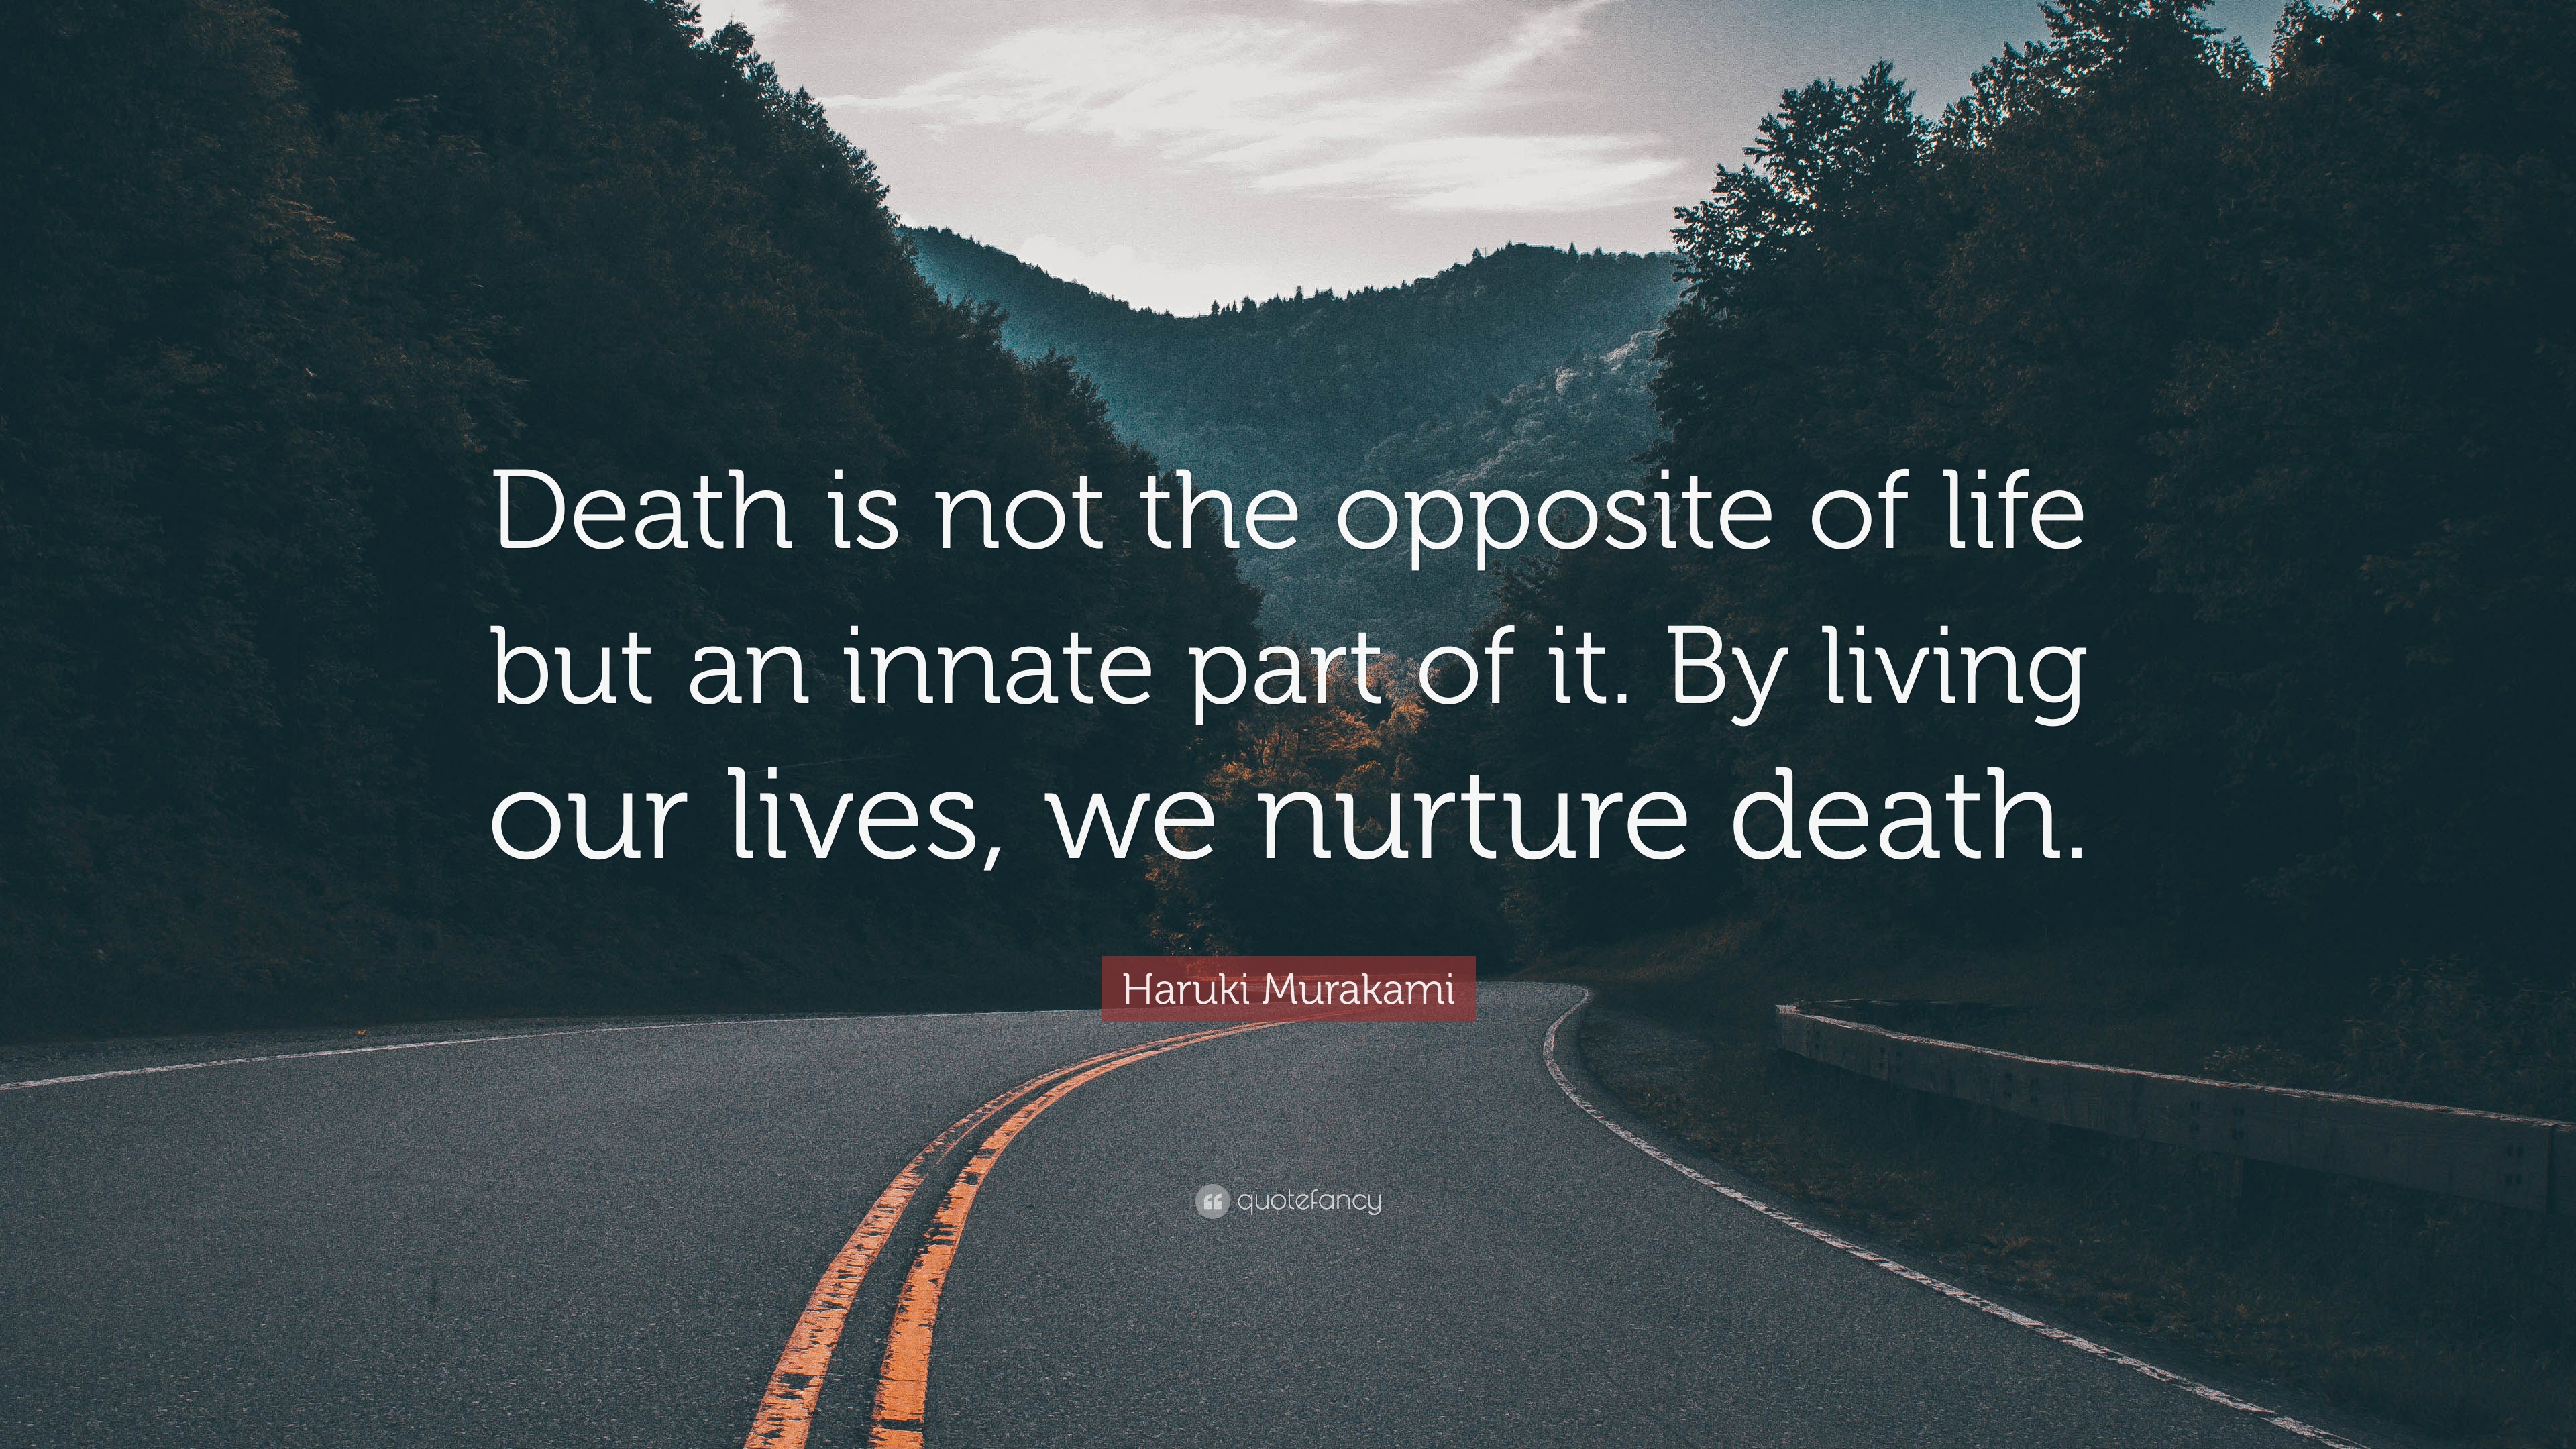 Haruki Murakami Quote: “Death is not the opposite of life but an innate ...